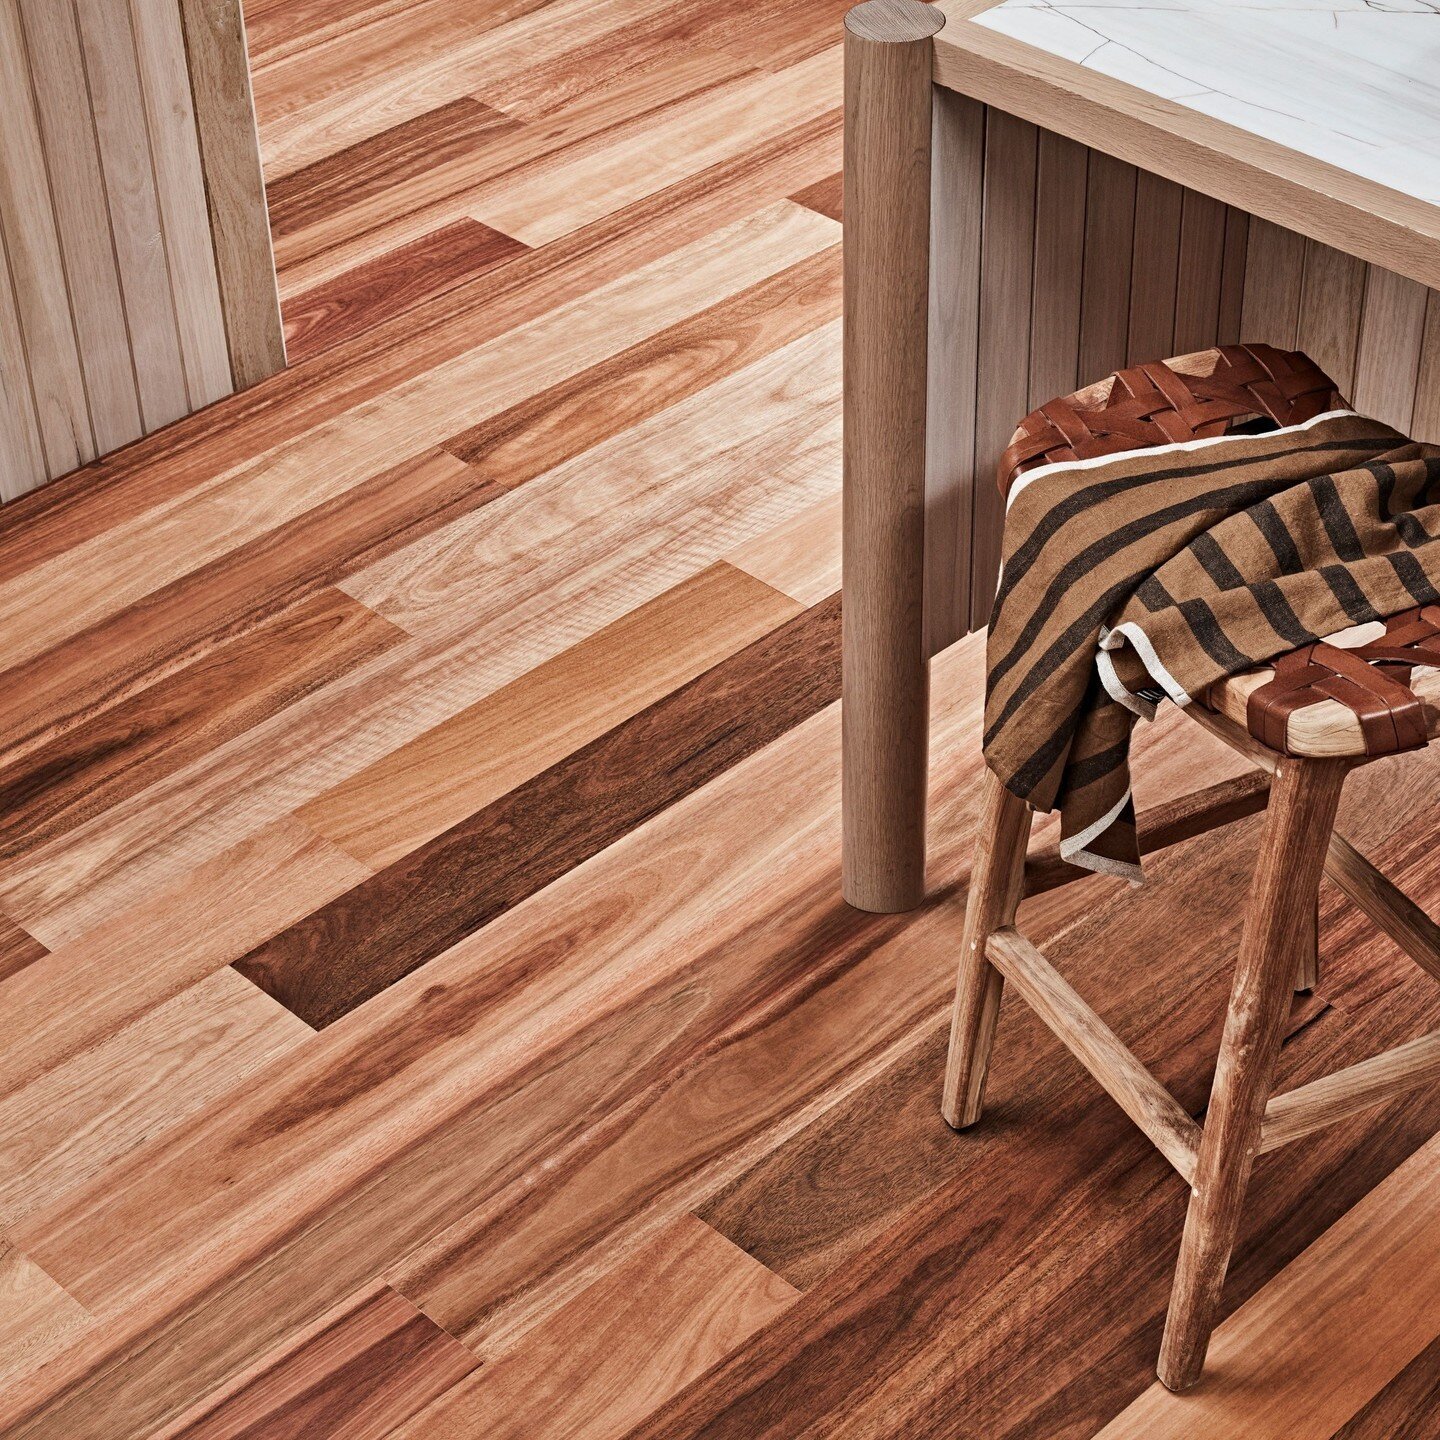 Why pick Godfrey Hirst wood flooring?⁠
⁠
👉Superior Engineered Timber: Featuring a robust hardwood top layer, our wood flooring promises exceptional strength and stability. Engineered timber resists warping and shifting, ensuring enduring beauty.⁠
⁠
